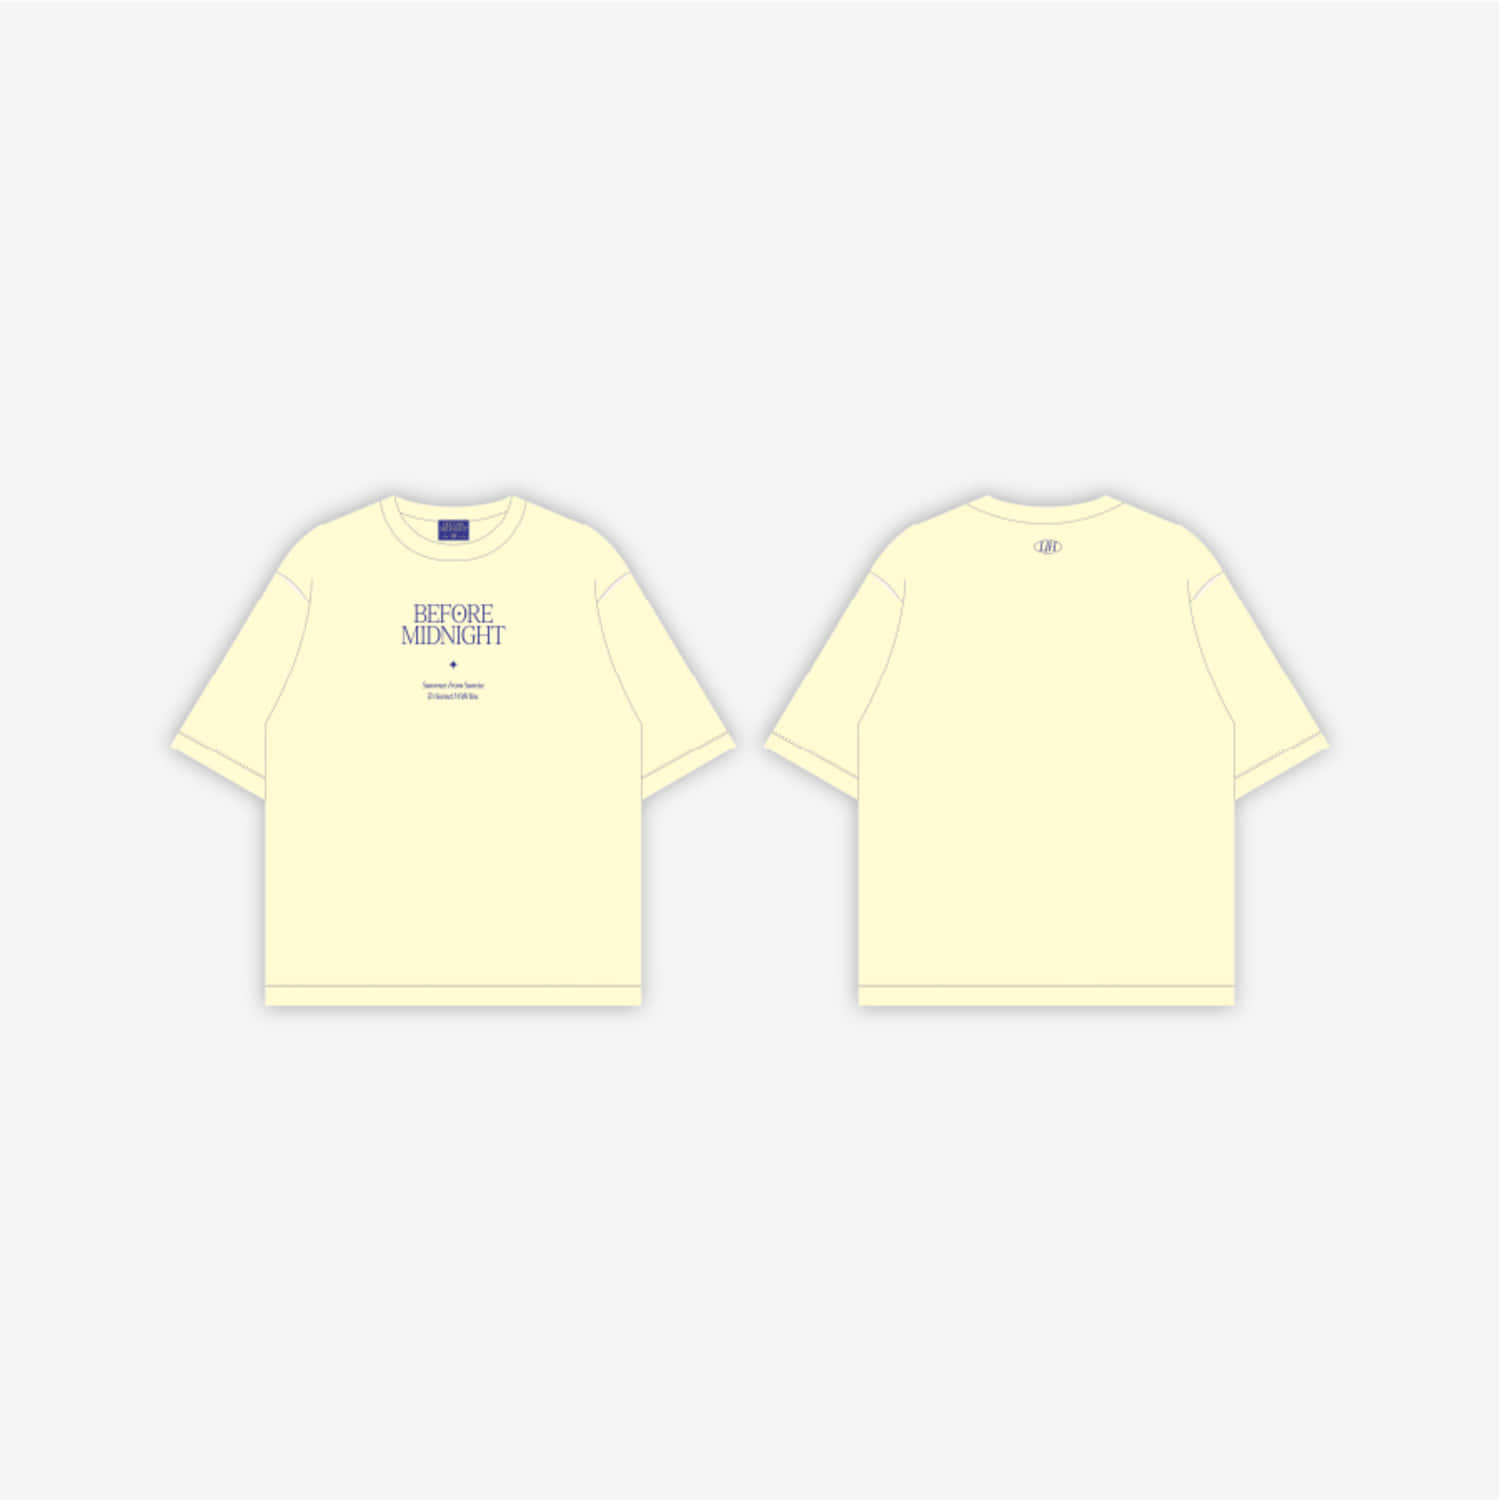 2PM 이준호(LEE JUNHO) [BEFORE MIDNIGHT] OFFICIAL MD - 티셔츠 Yellow ver. T-SHIRT Yellow ver.